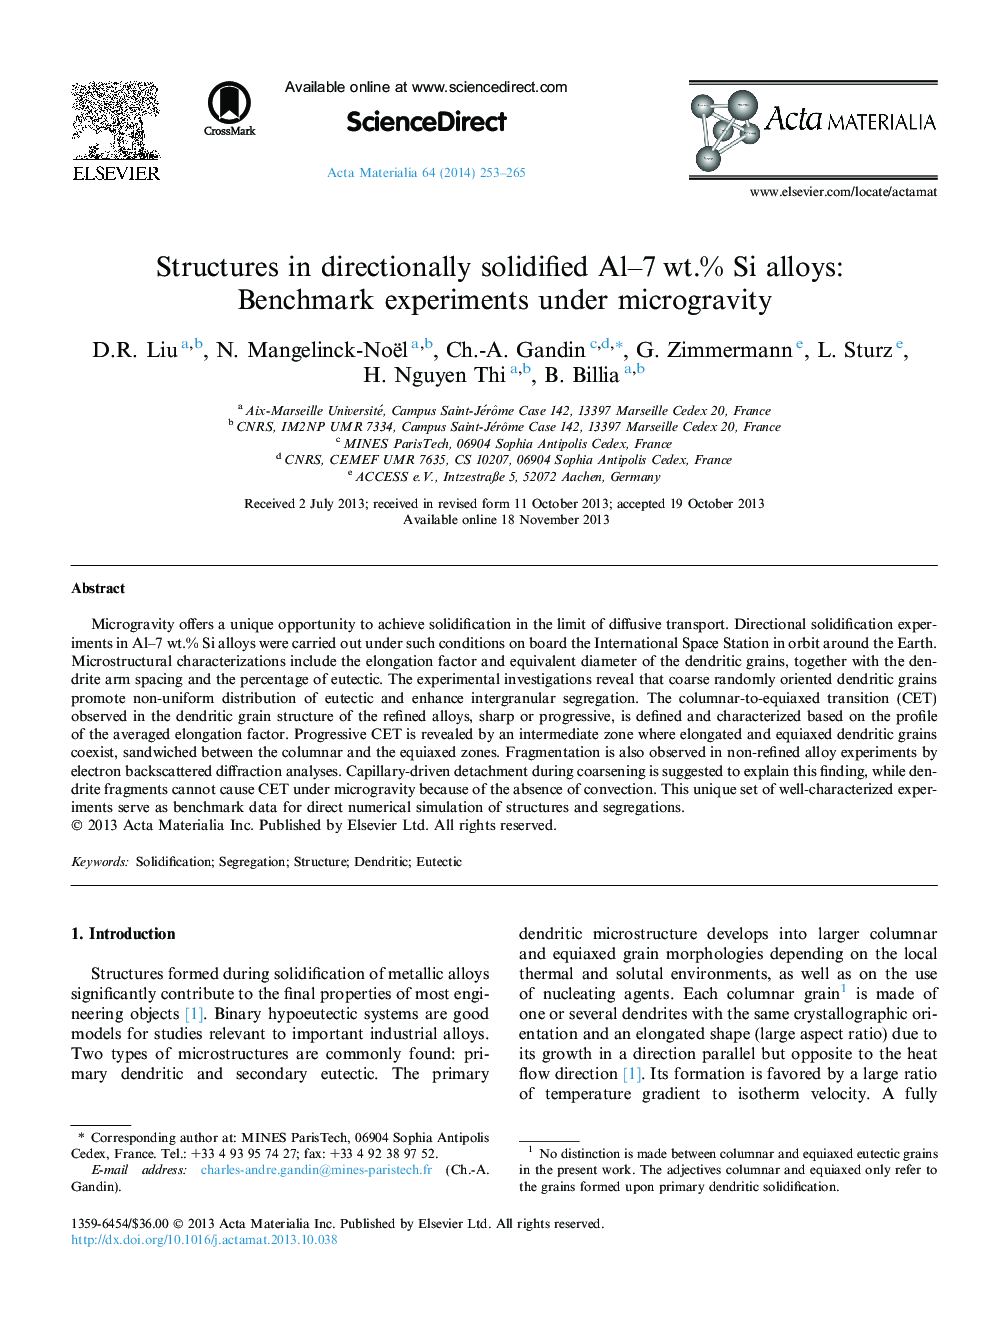 Structures in directionally solidified Al-7Â wt.% Si alloys: Benchmark experiments under microgravity